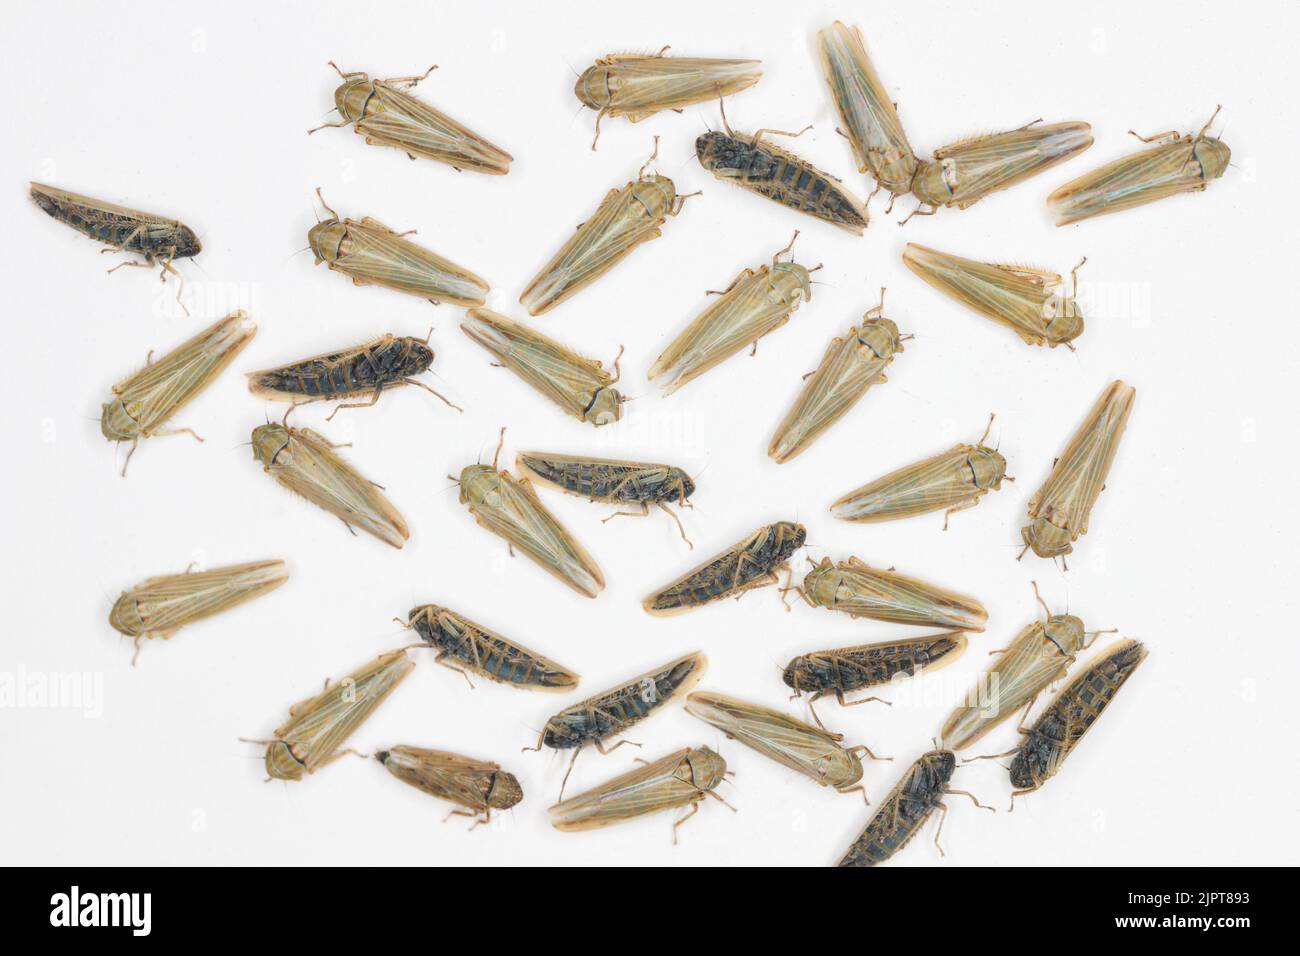 Leafhoppers (Cicadellidae) of the genus Mocydiopsis. Stock Photo